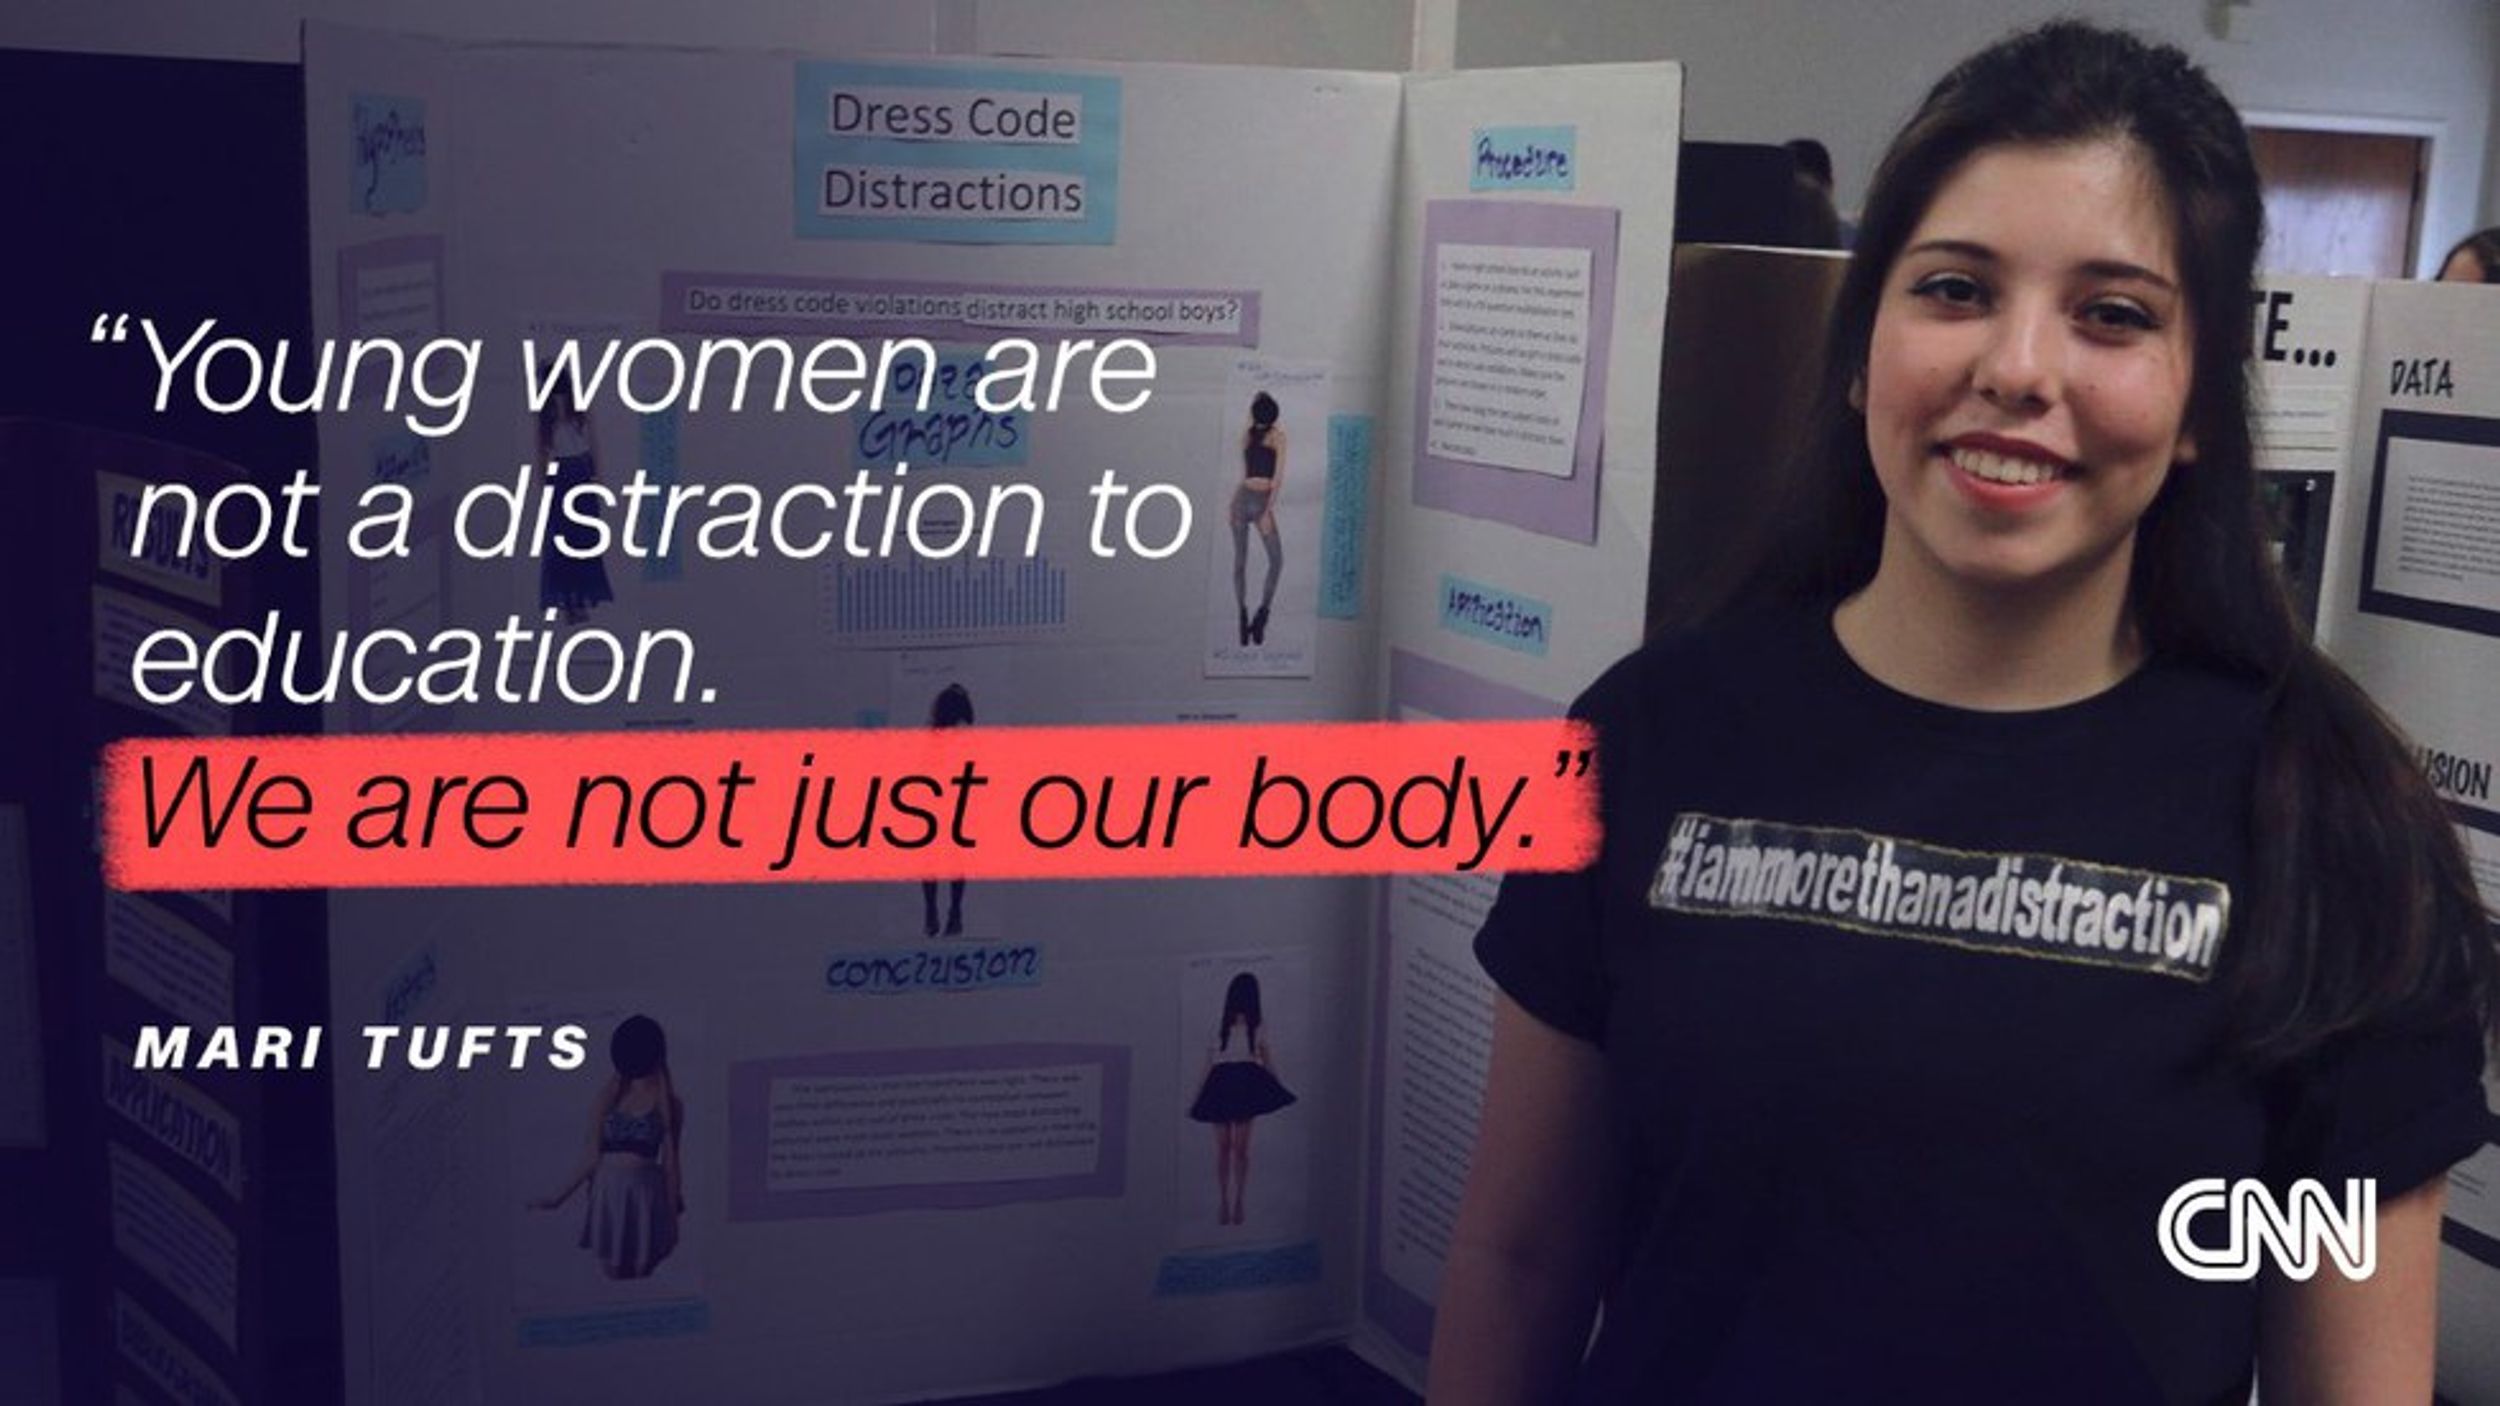 6 Reasons Why High School Dresscodes Are Sexist